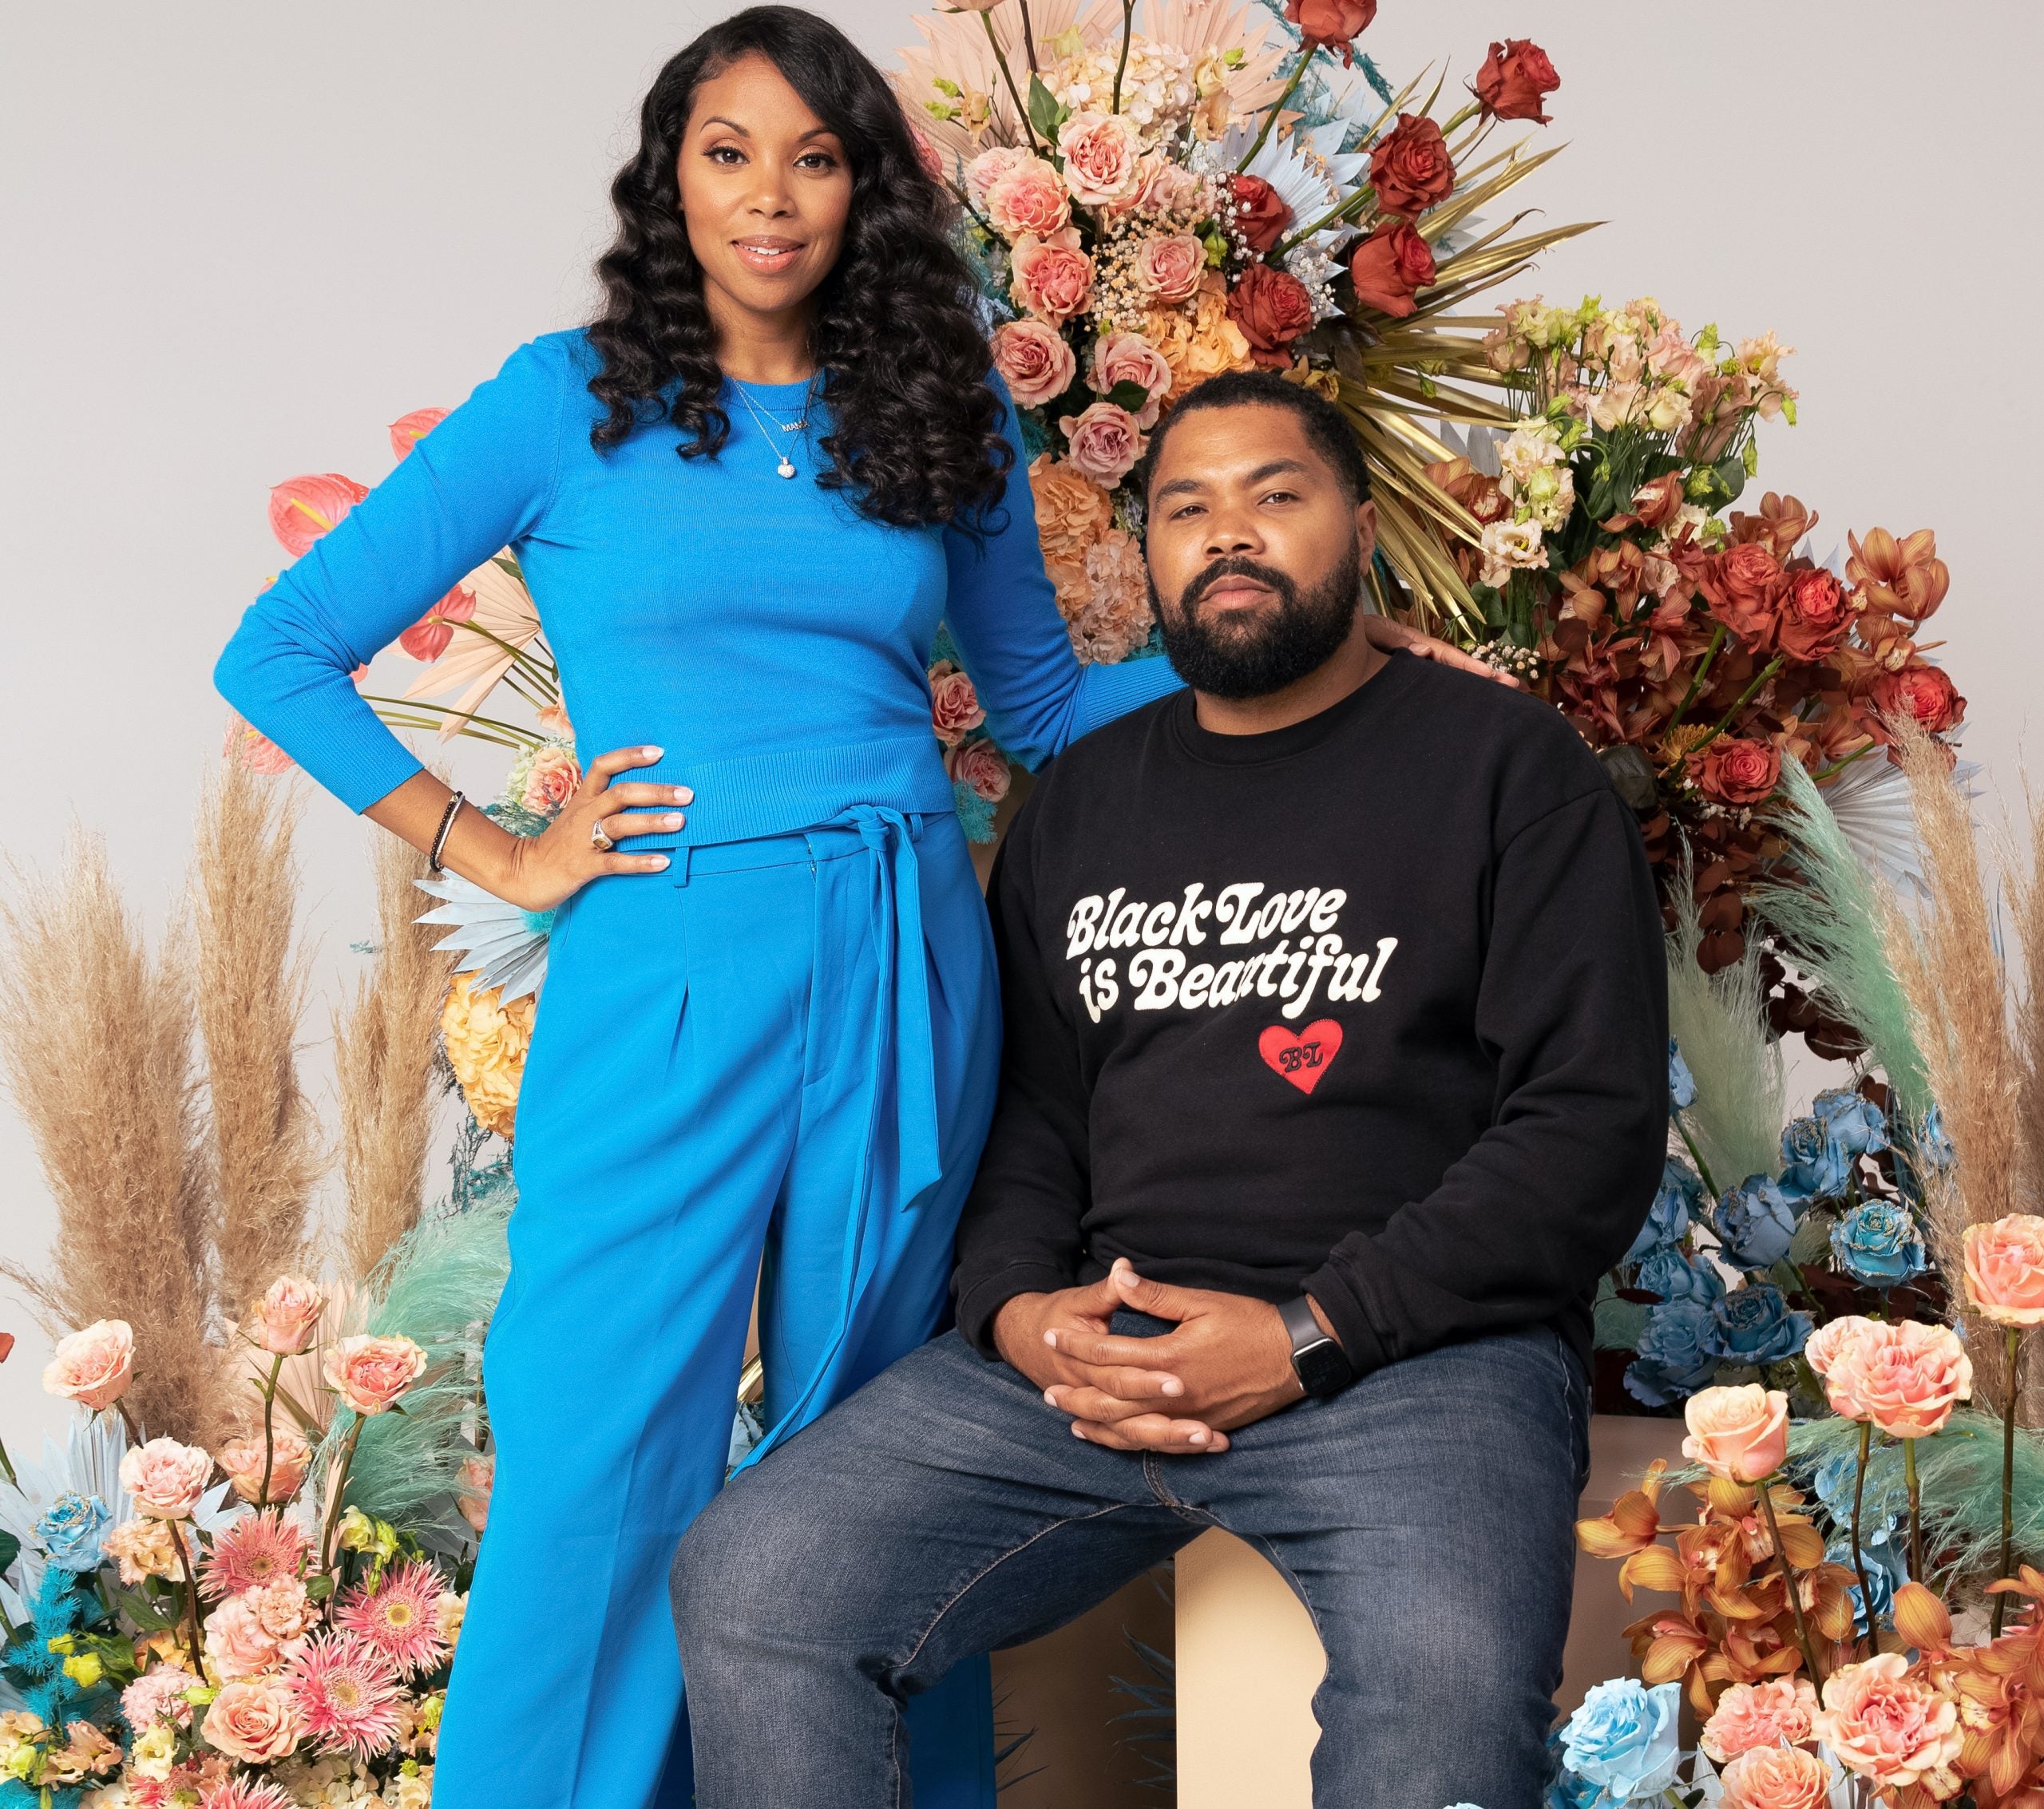 The Founders Of 'Black Love' Series Landed A Deal To Launch Their Own Channel